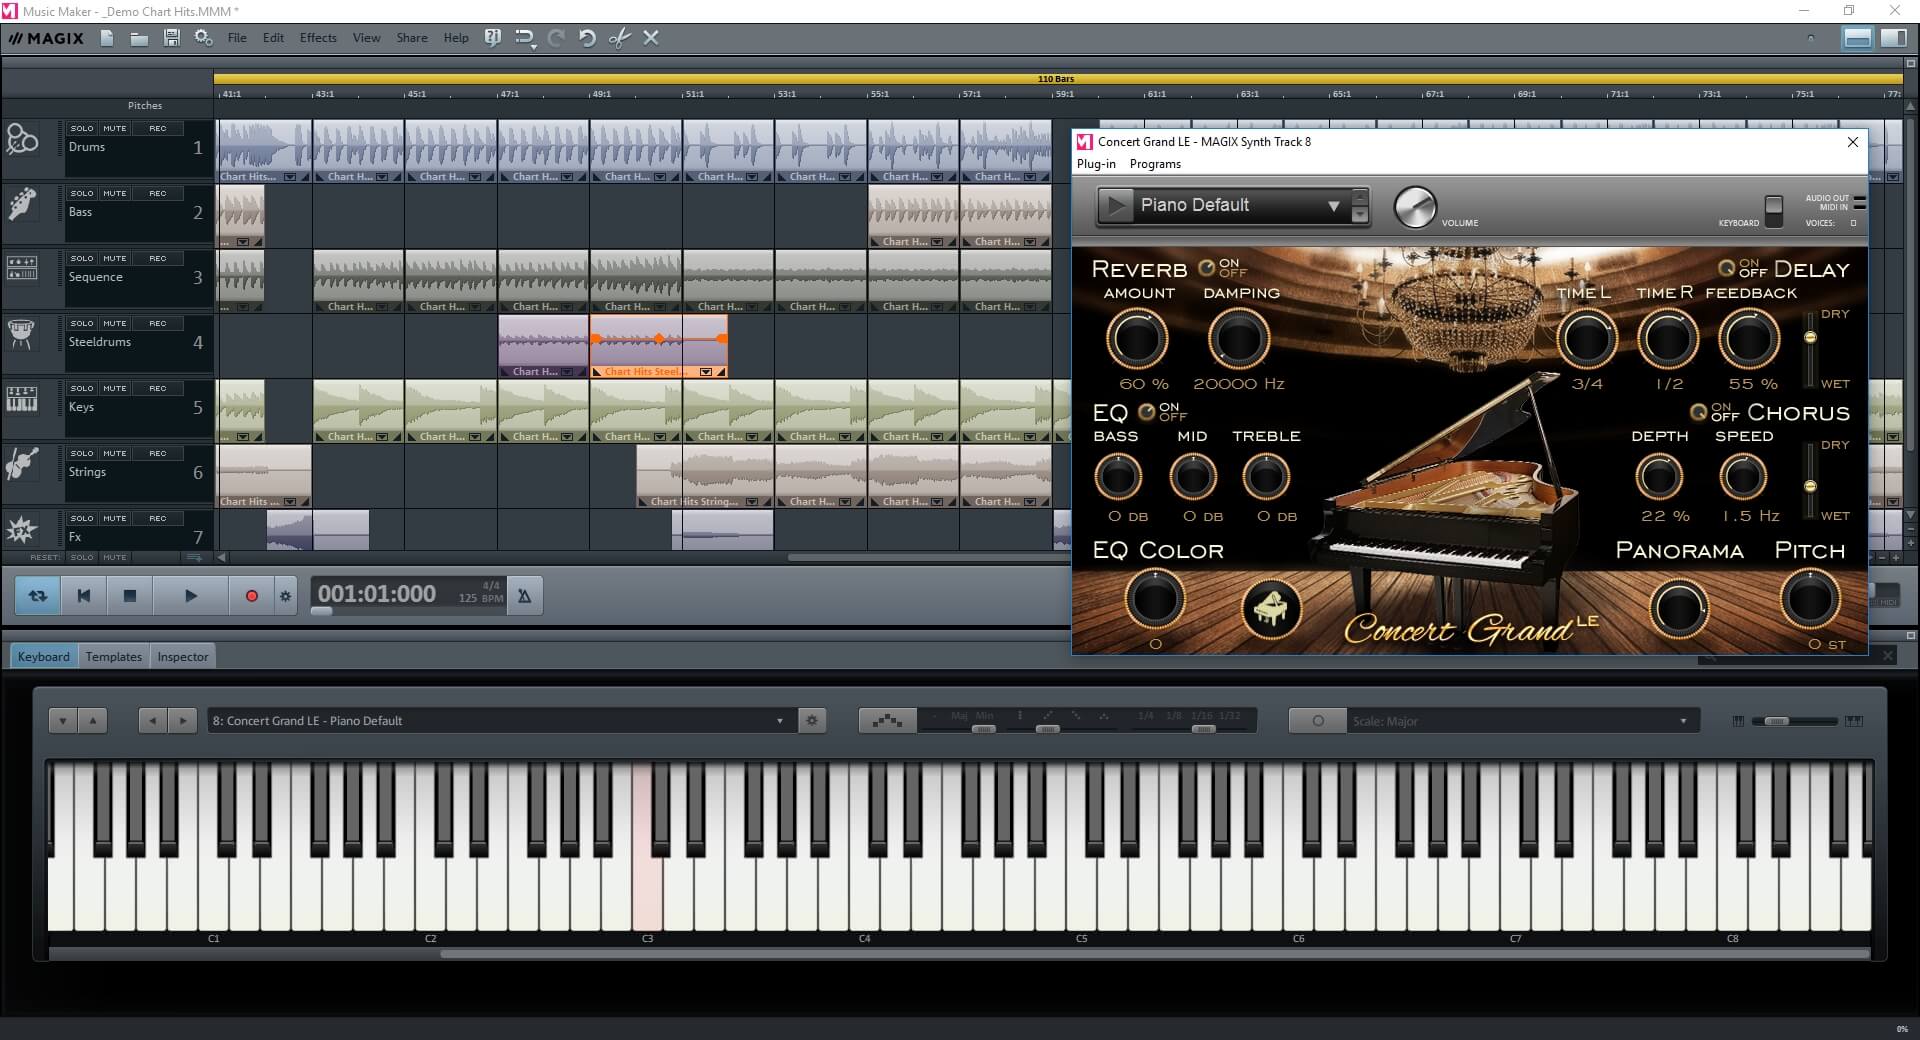 Furnace Basket knot Magix releases new free version of Music Maker software